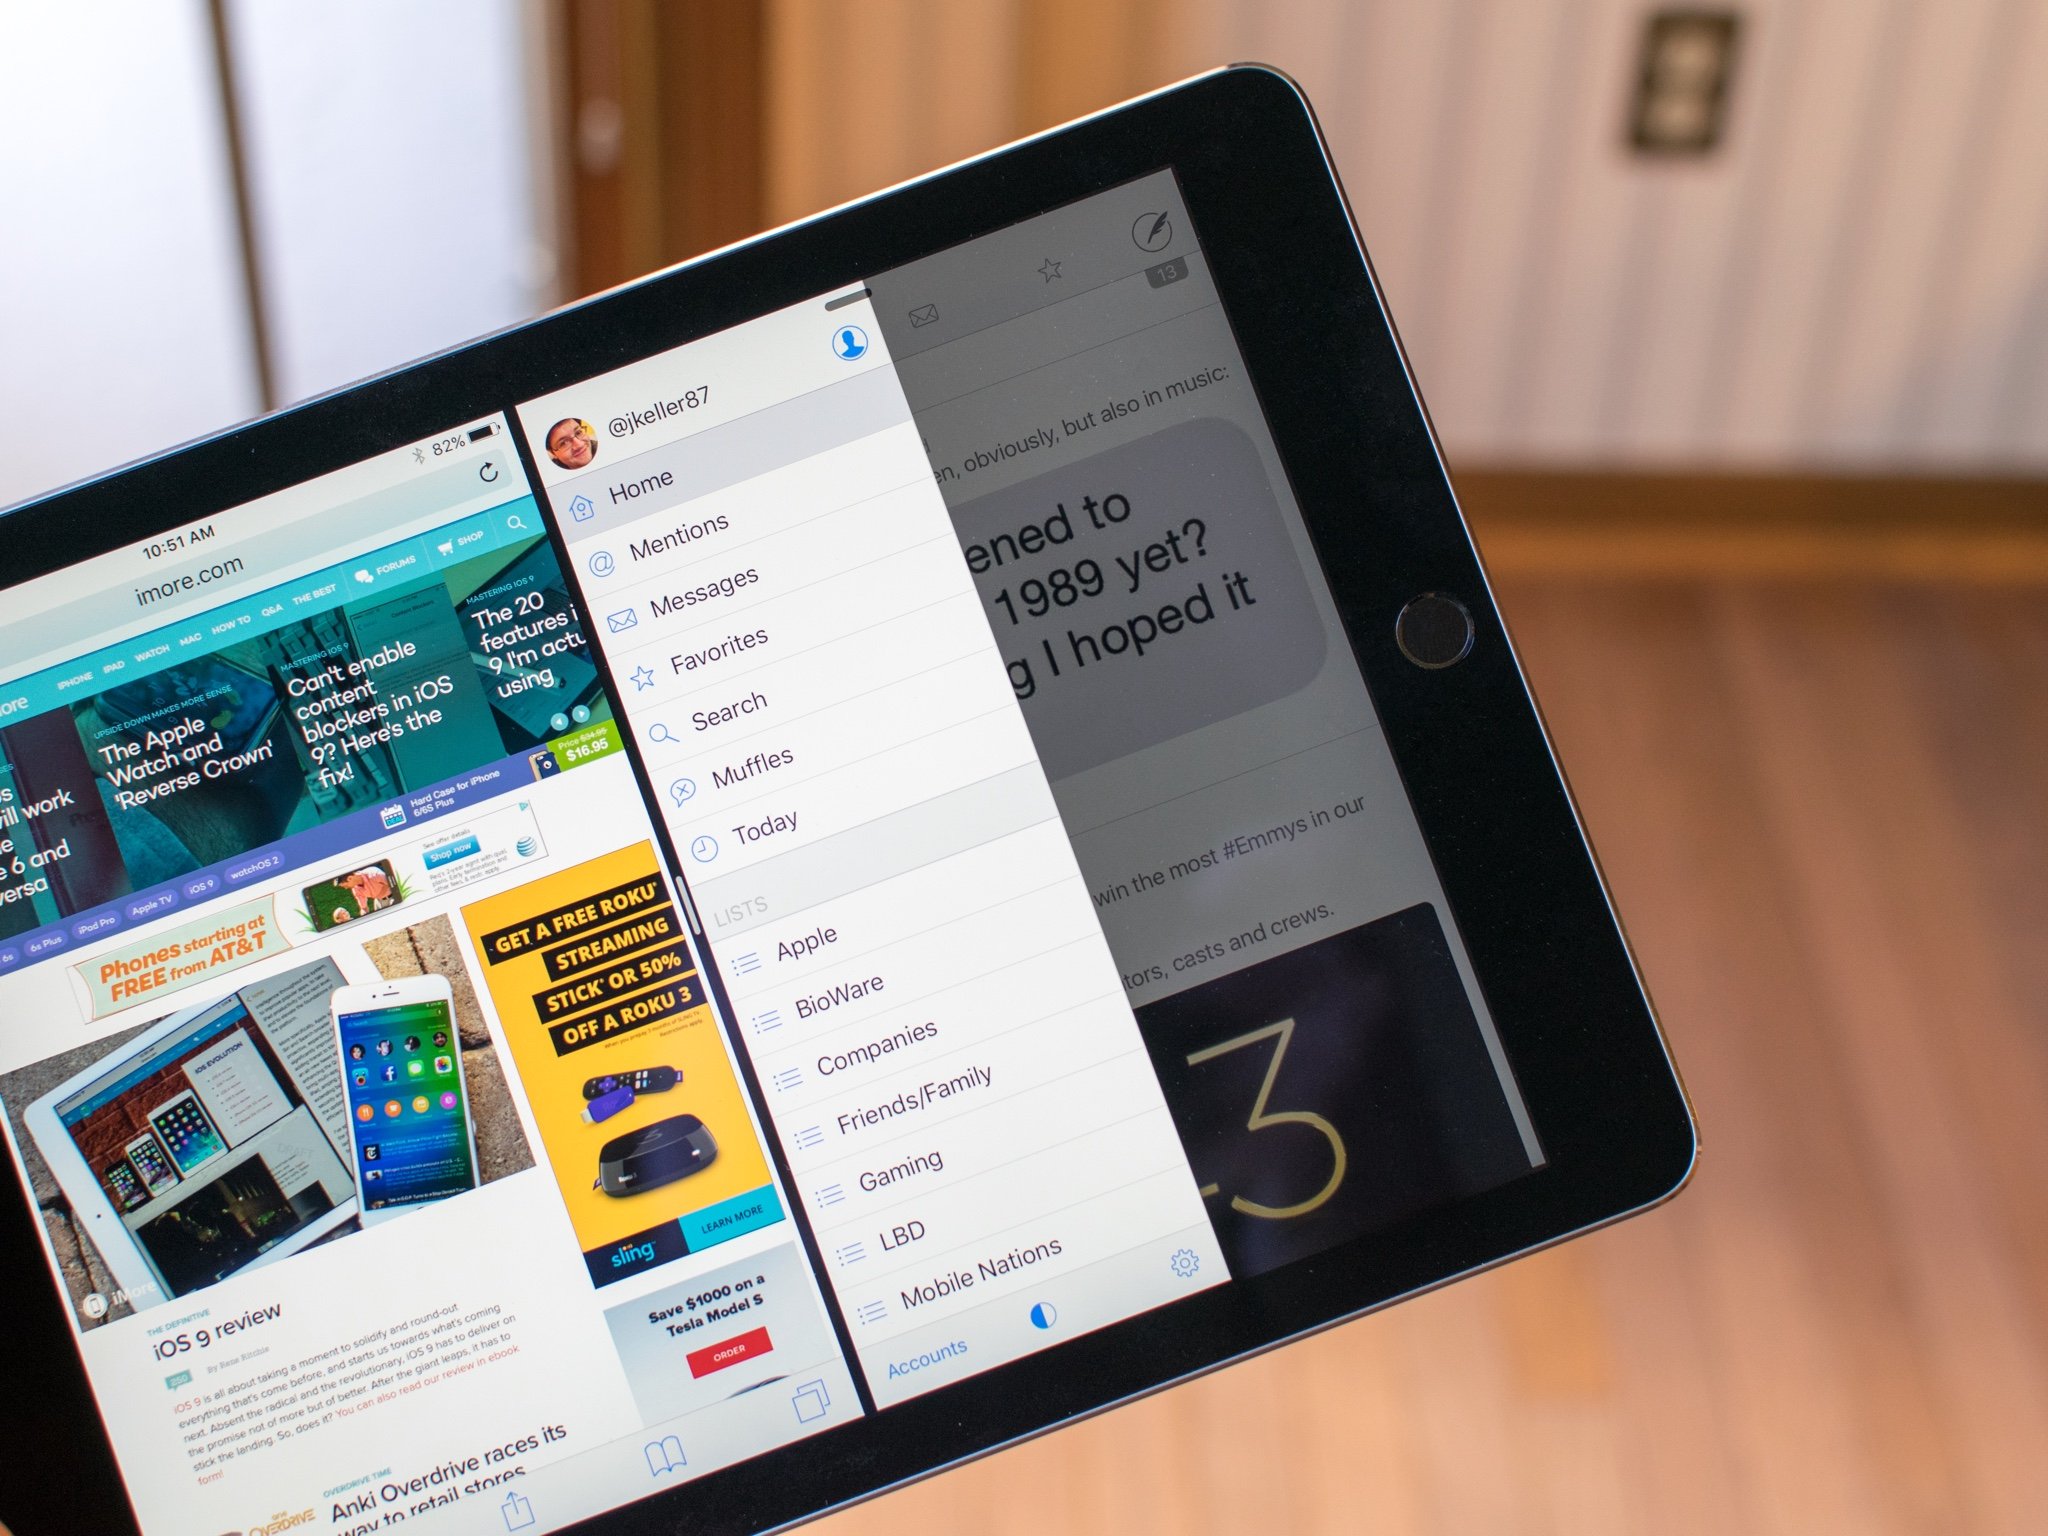 Twitterrific picks up quick reply and iPad multitasking support